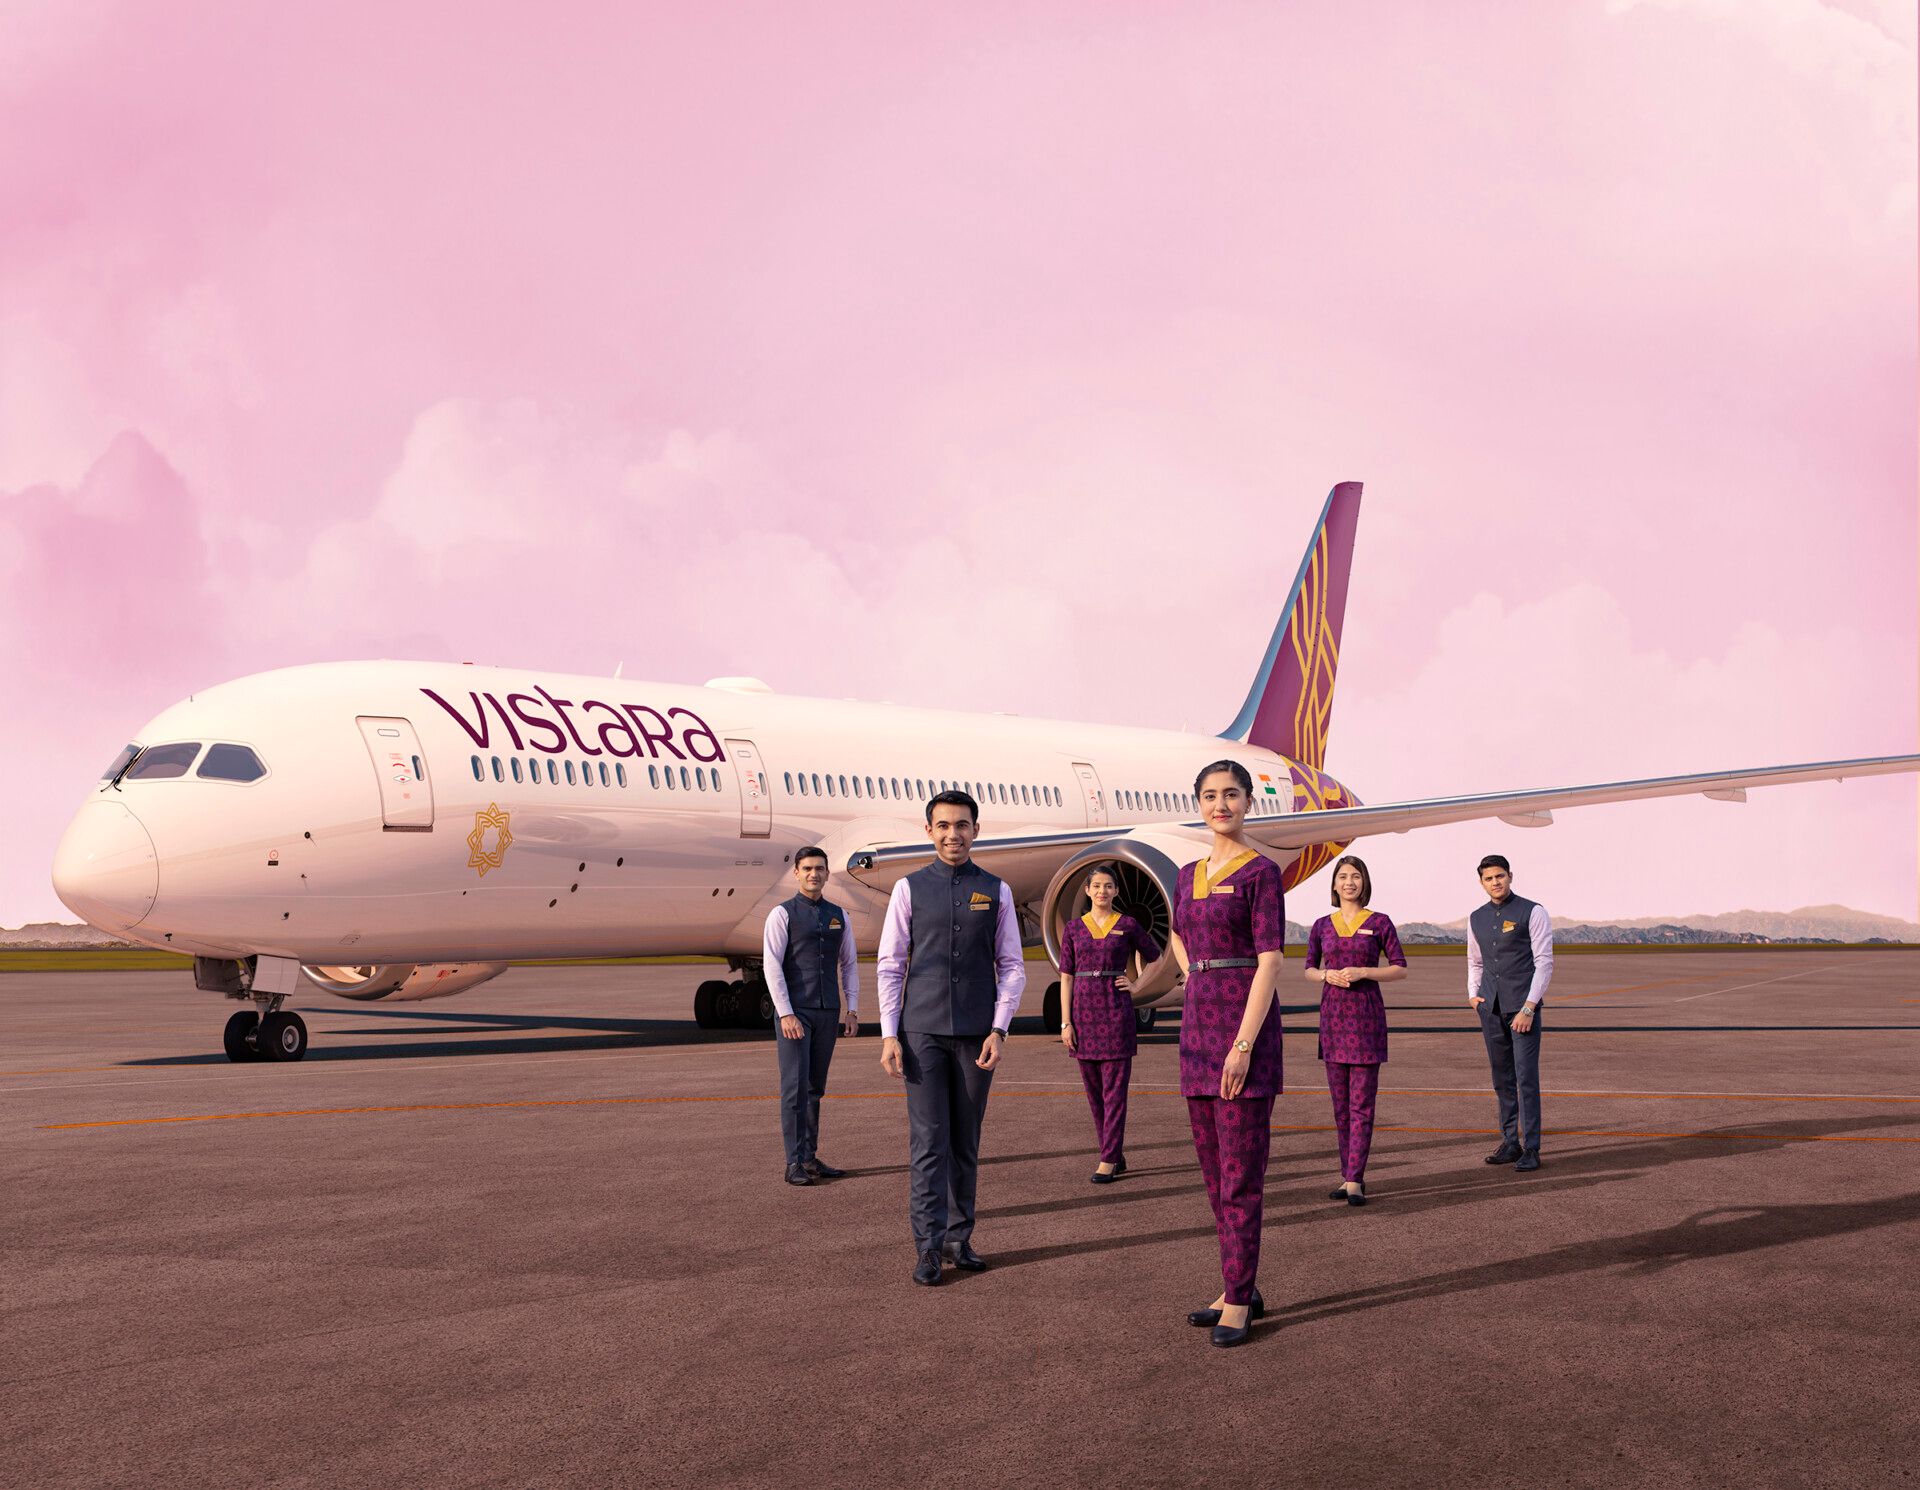 Vistara To Add 1,000 New Jobs As Recovery Picks Up